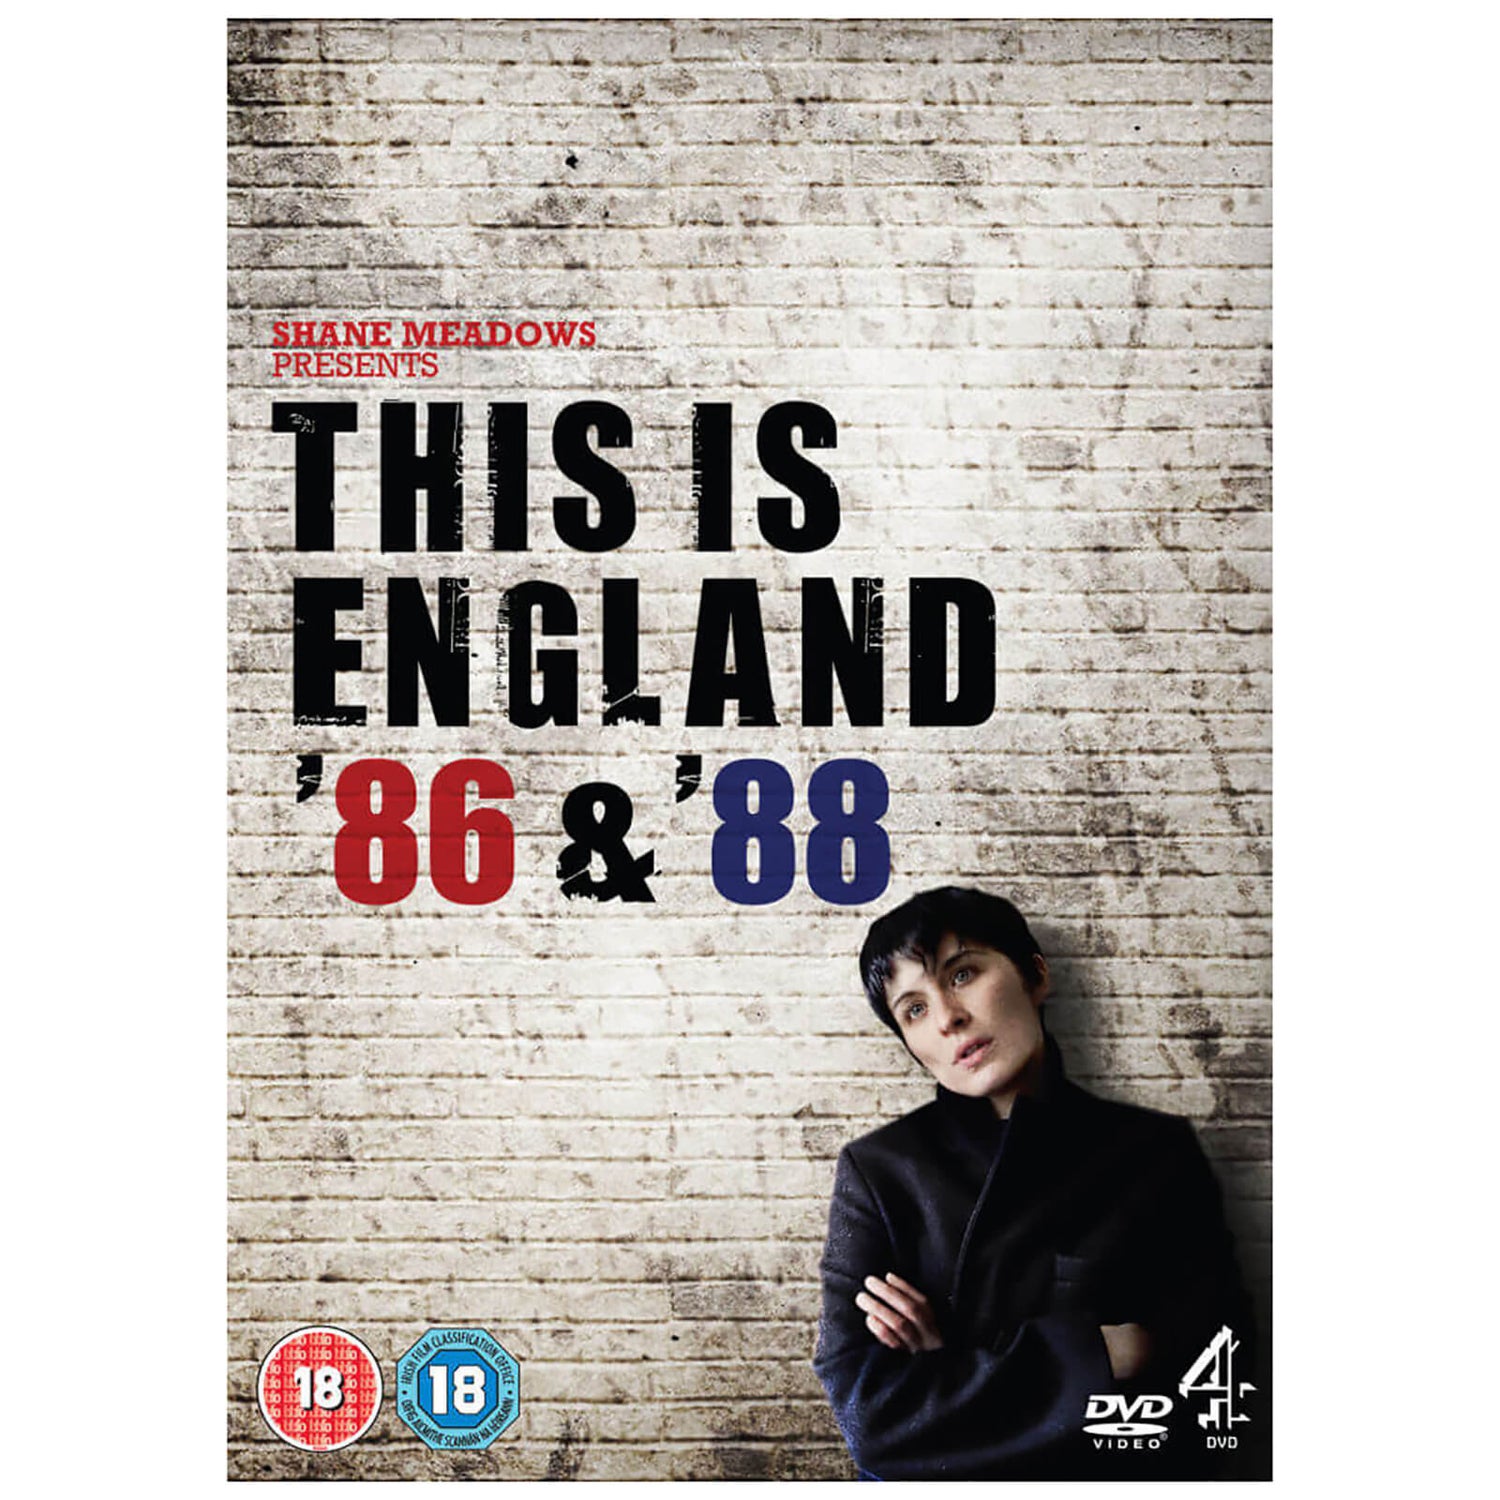 This is England 86 and This is England 88 Boxset